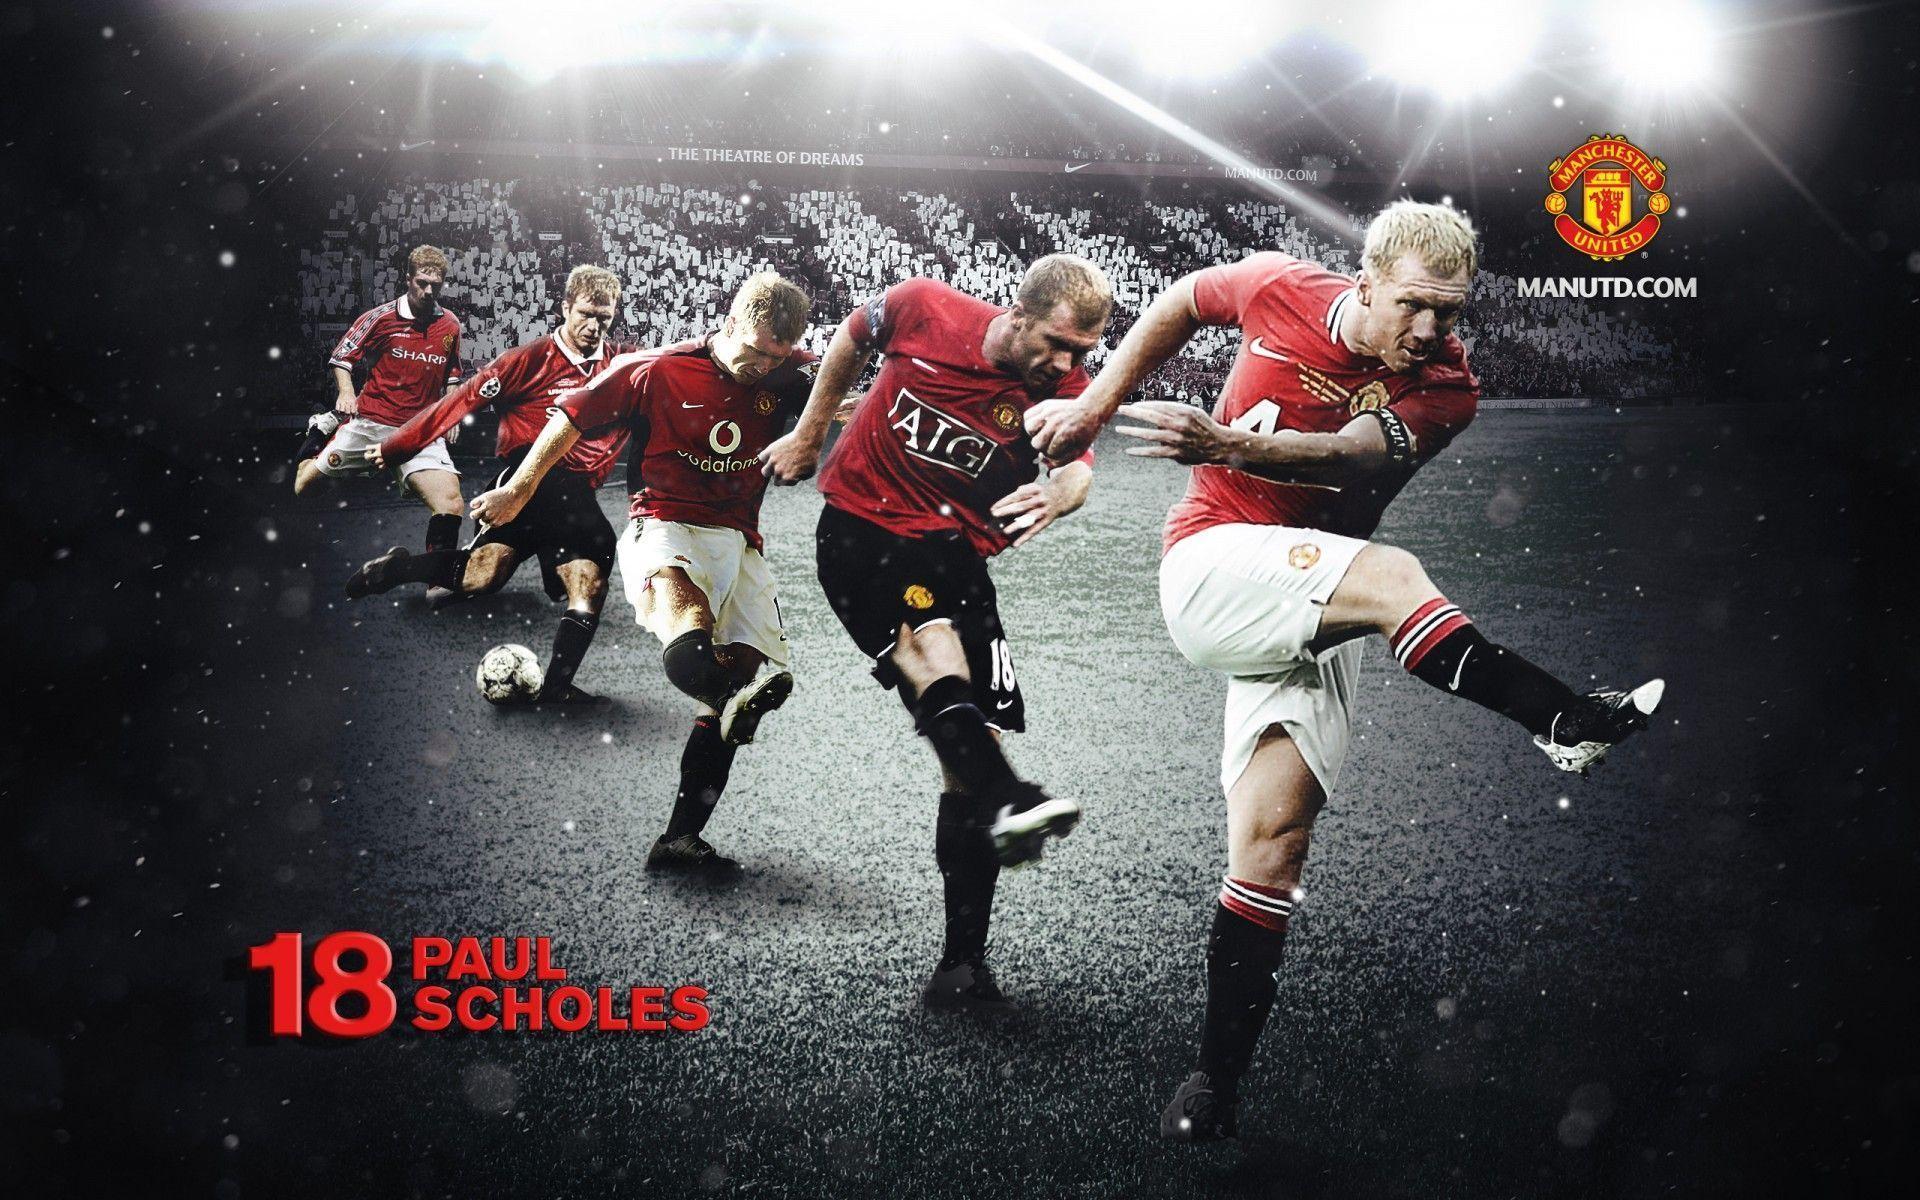 Manchester United Logo Wallpapers HD 2015 - Wallpaper Cave